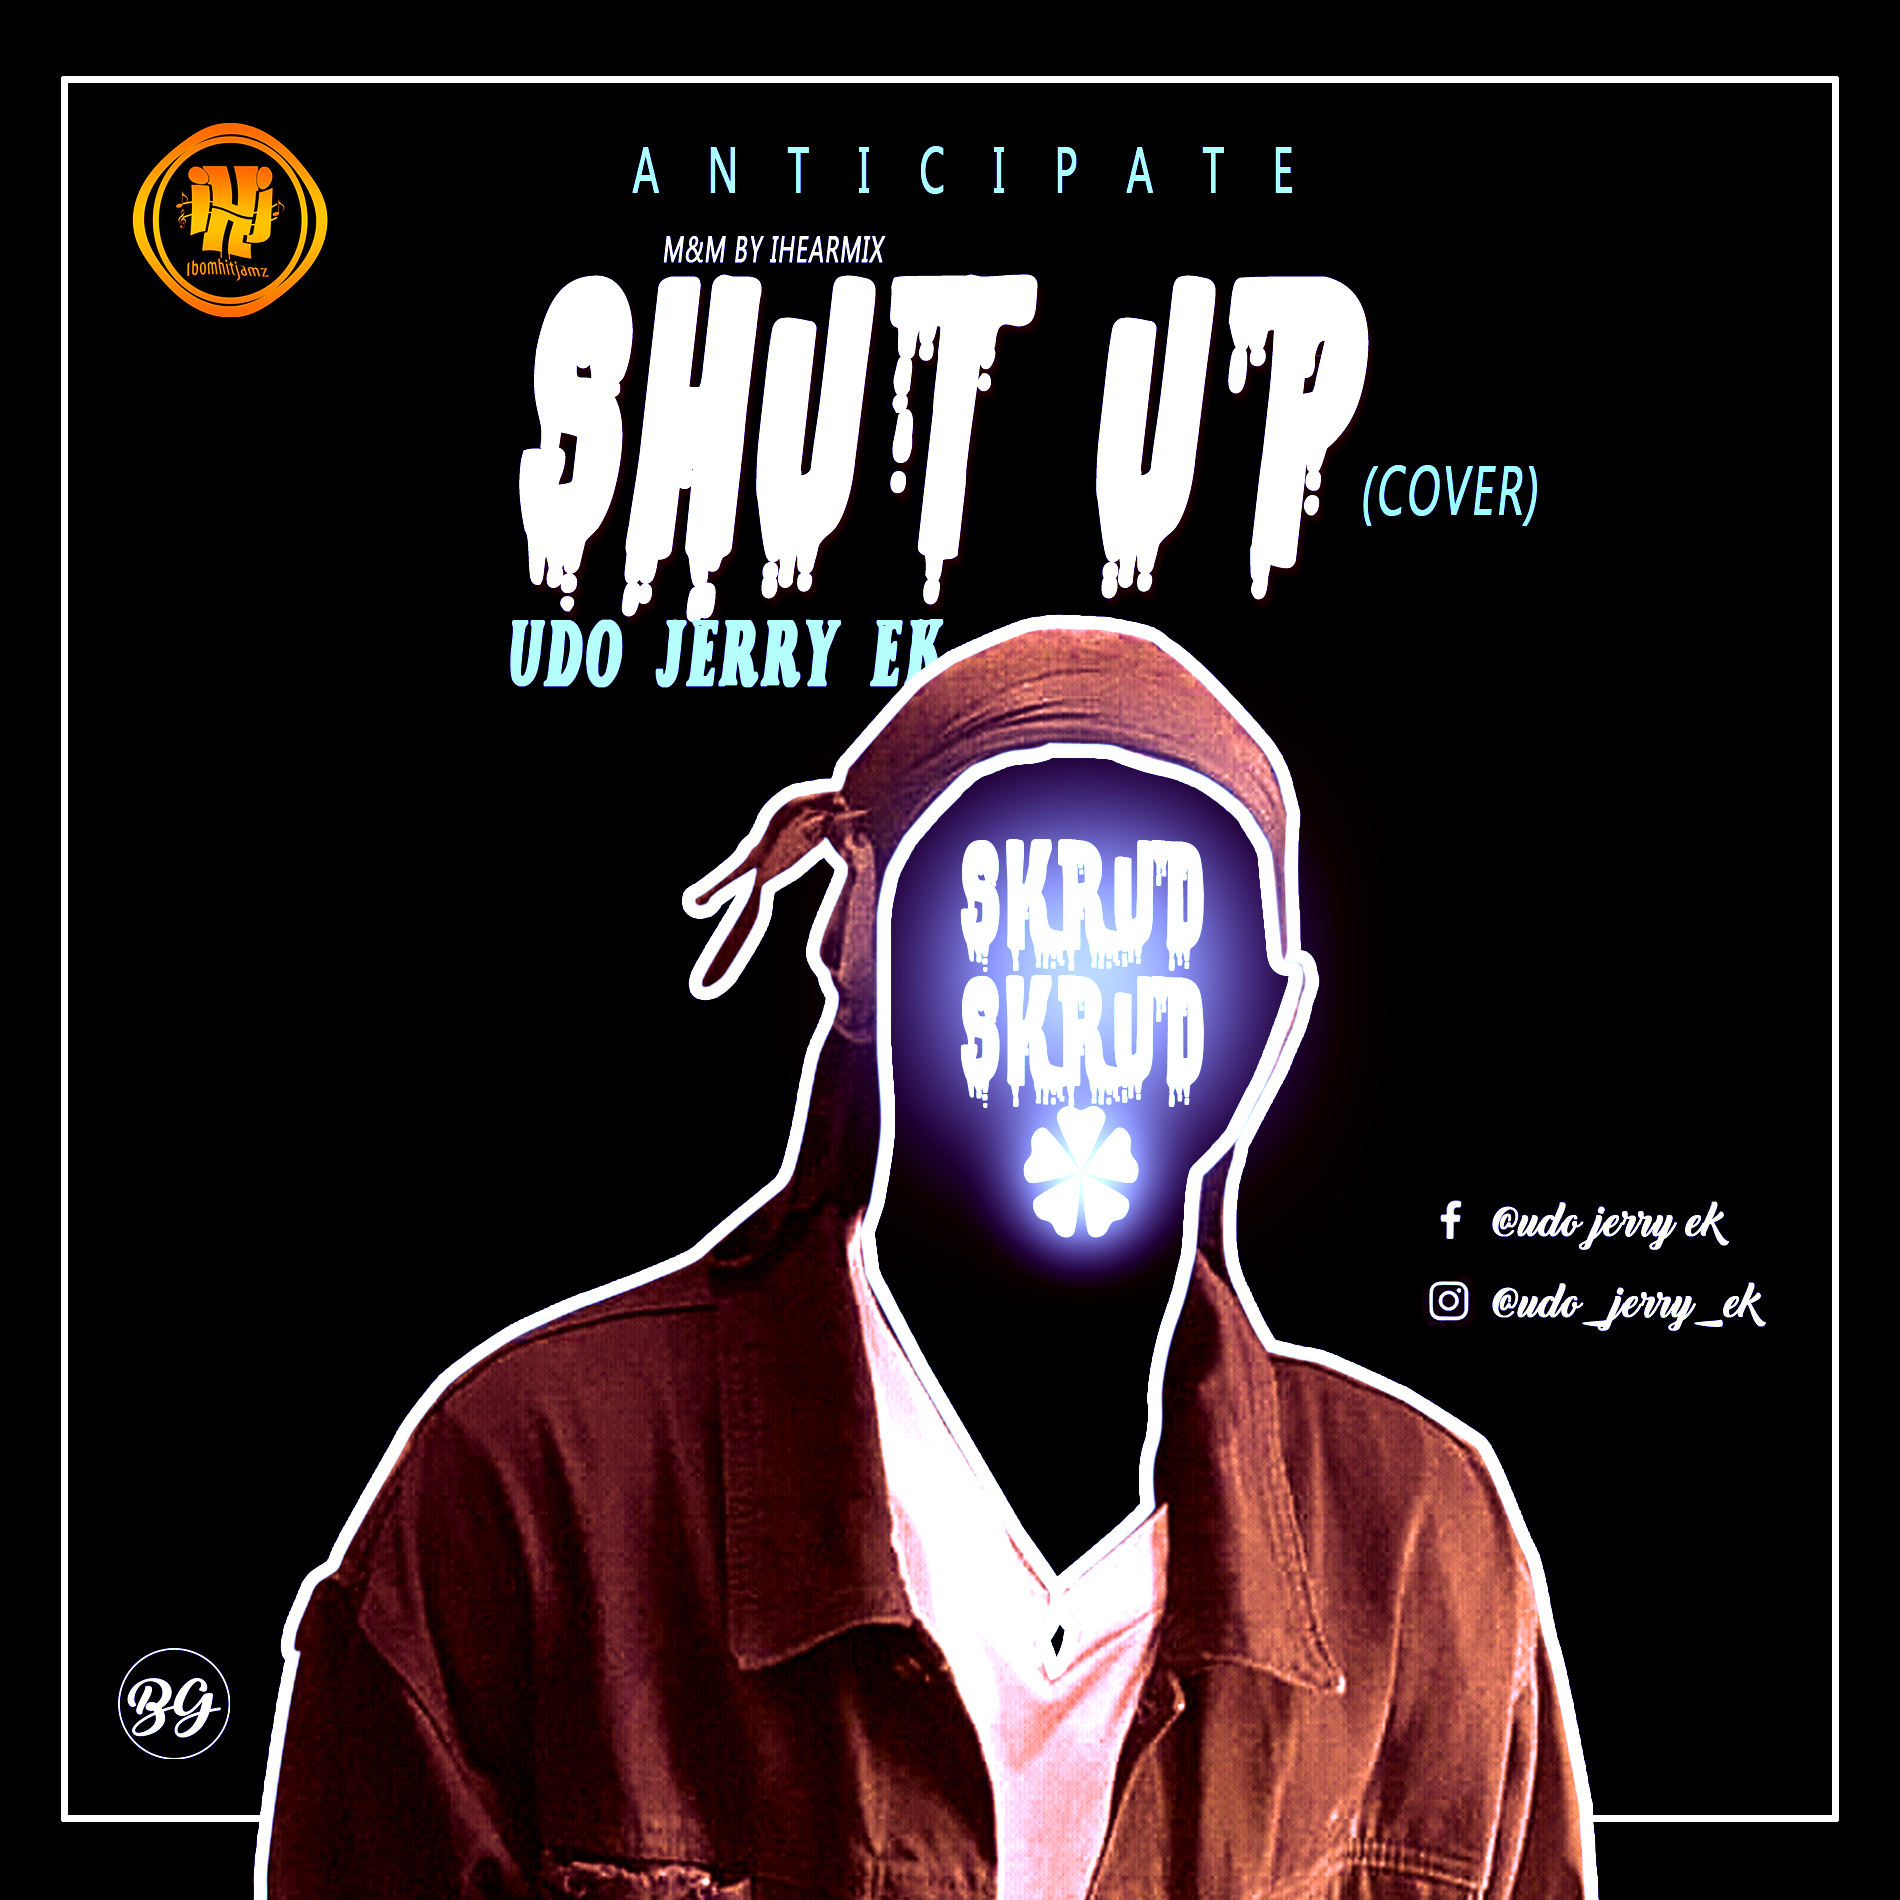 DOWNLOAD MUSIC: Udo Jerry – Shut Up (cover)